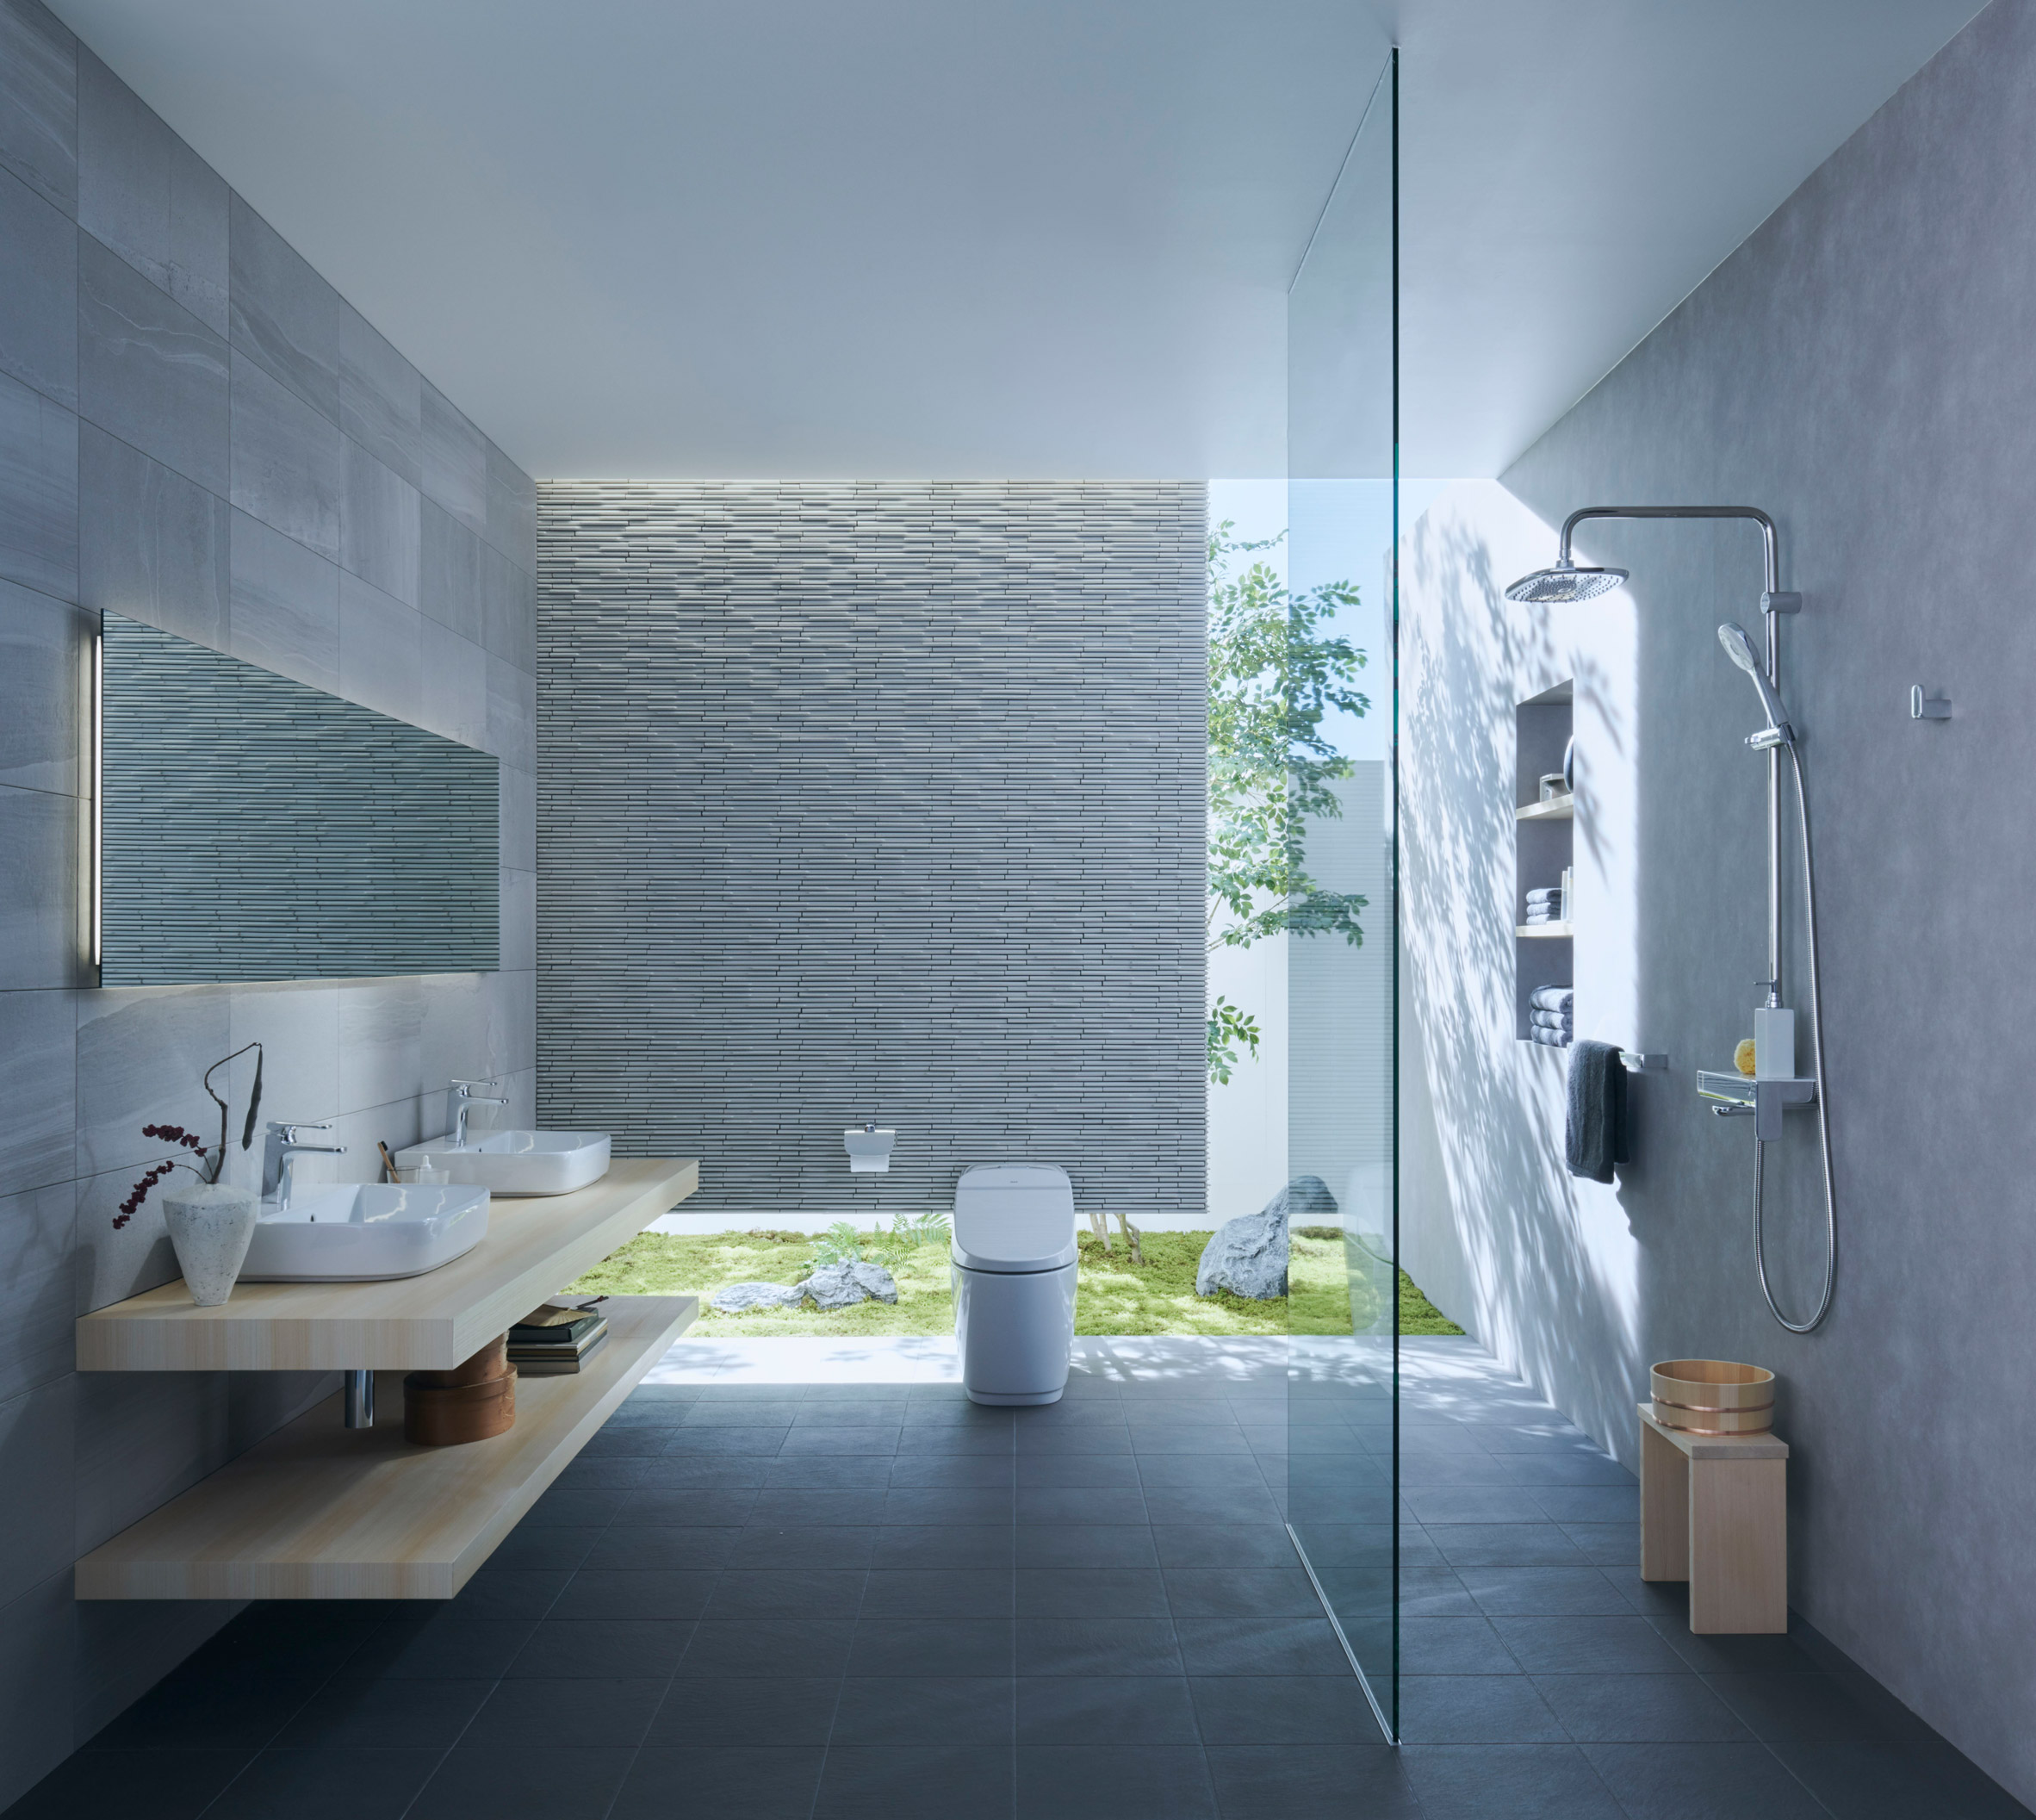 The Rituals of Water bathroom collection by INAX